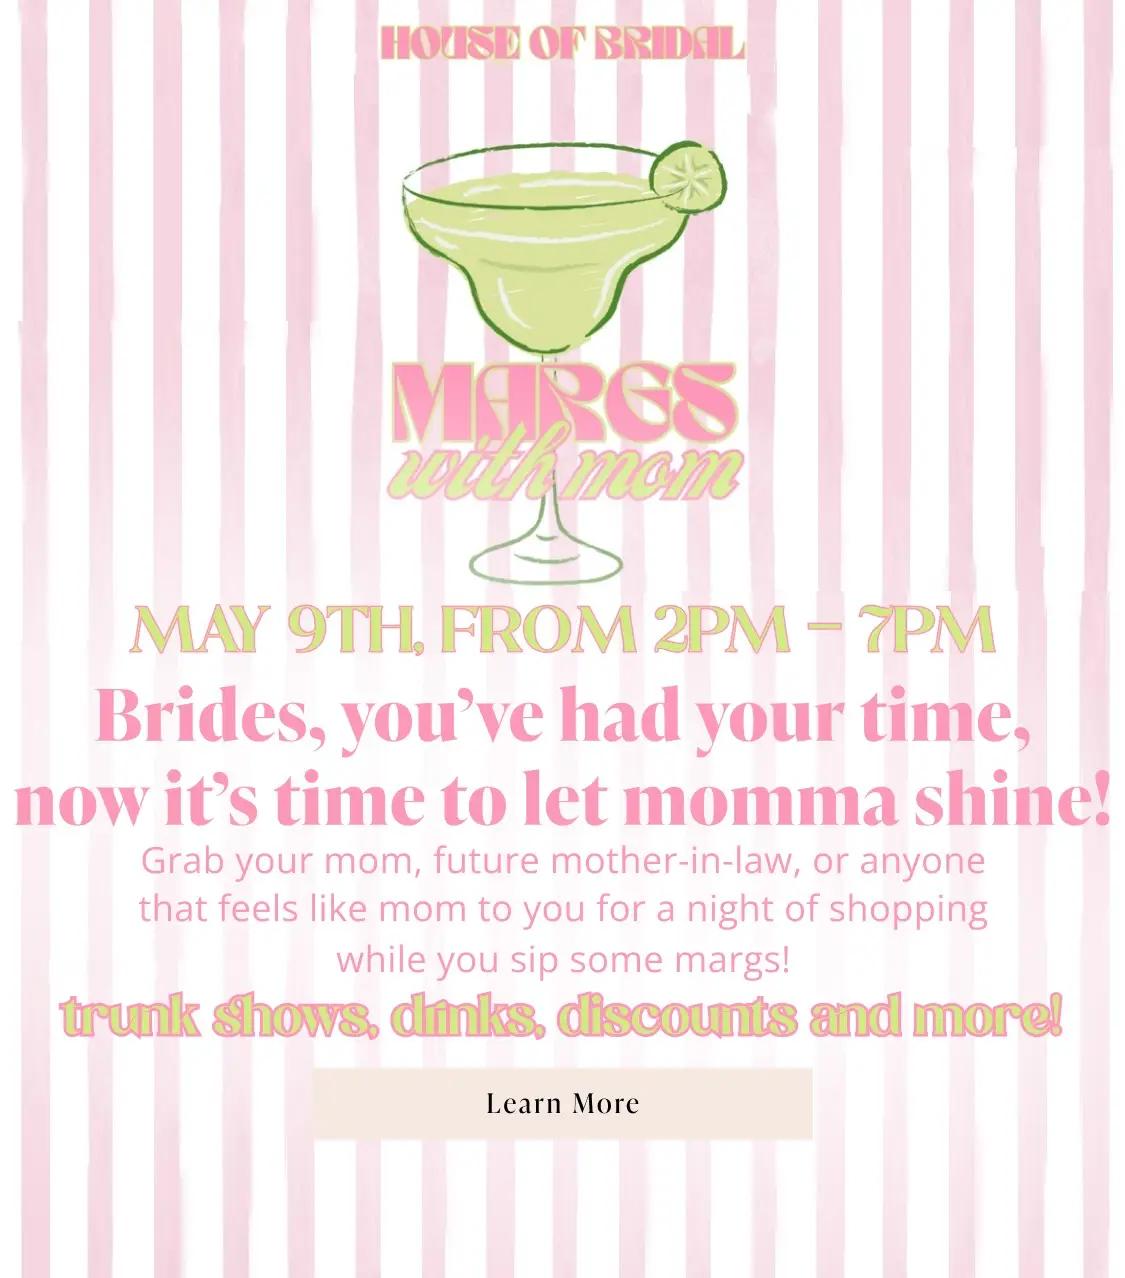 Margs with Mom Banner Mobile